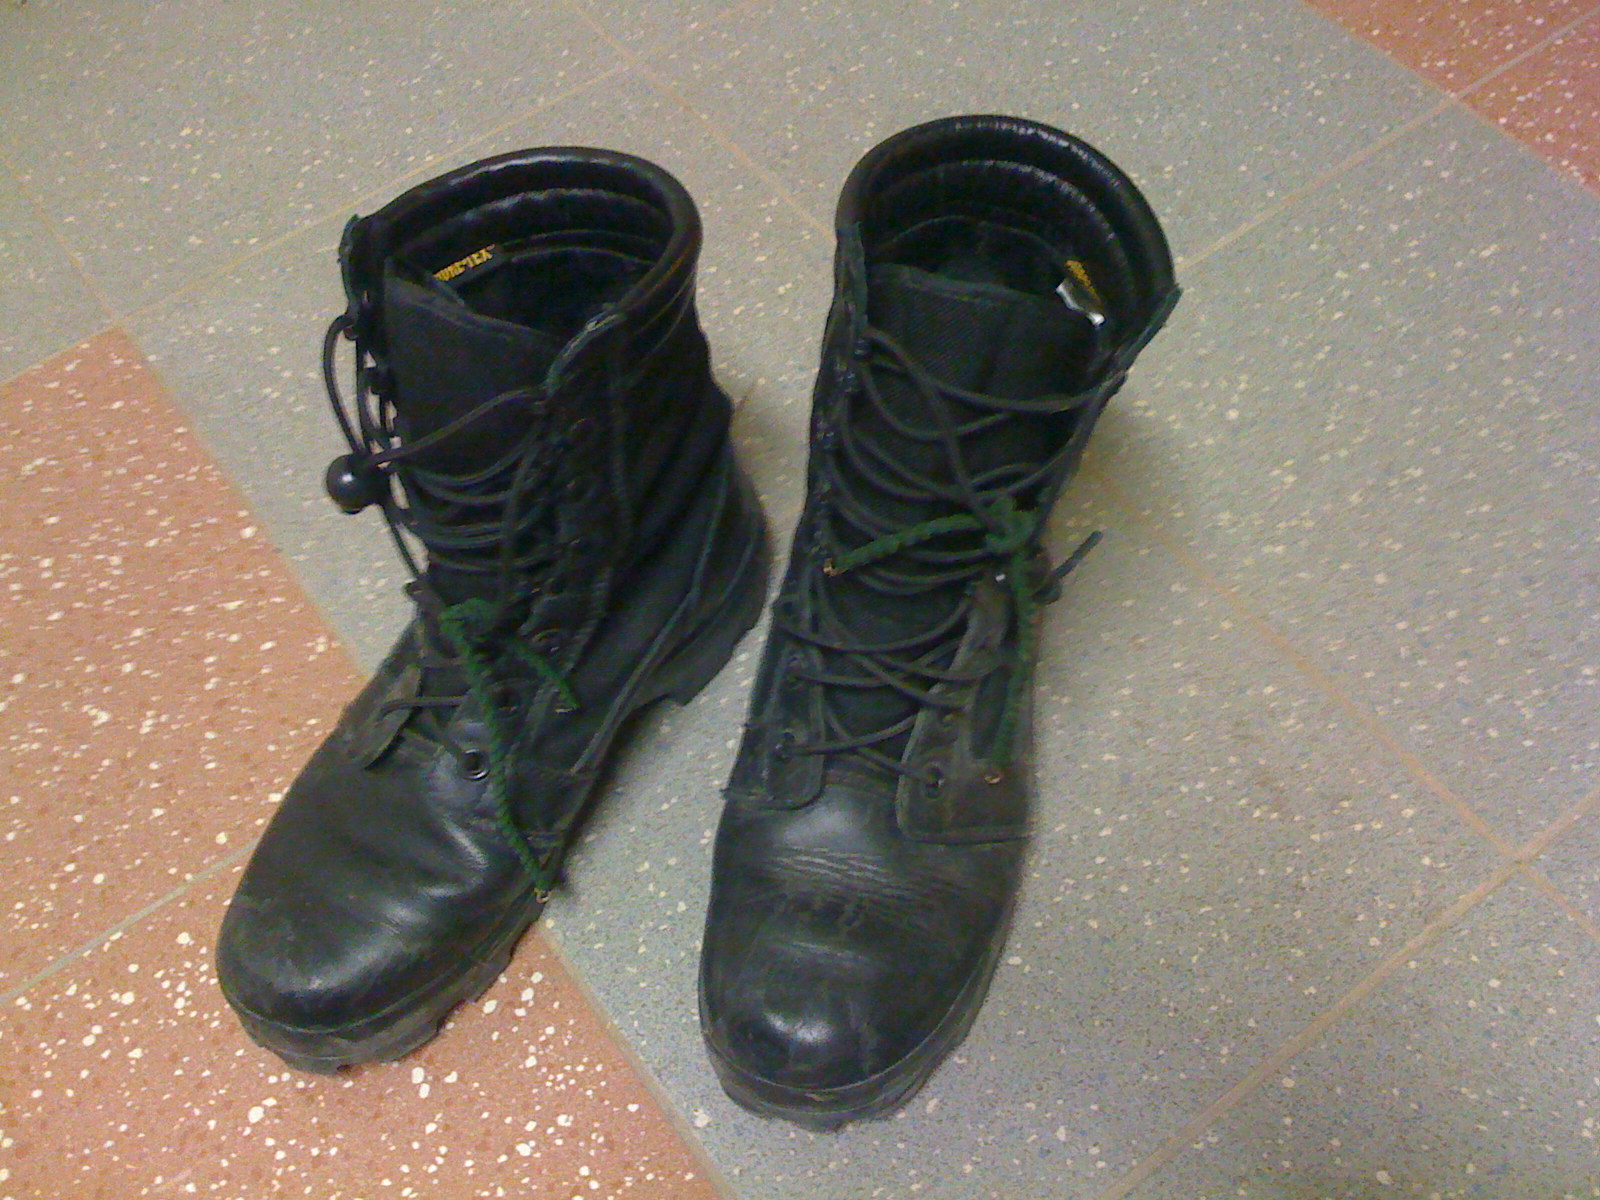 two black leather boots with laces on each